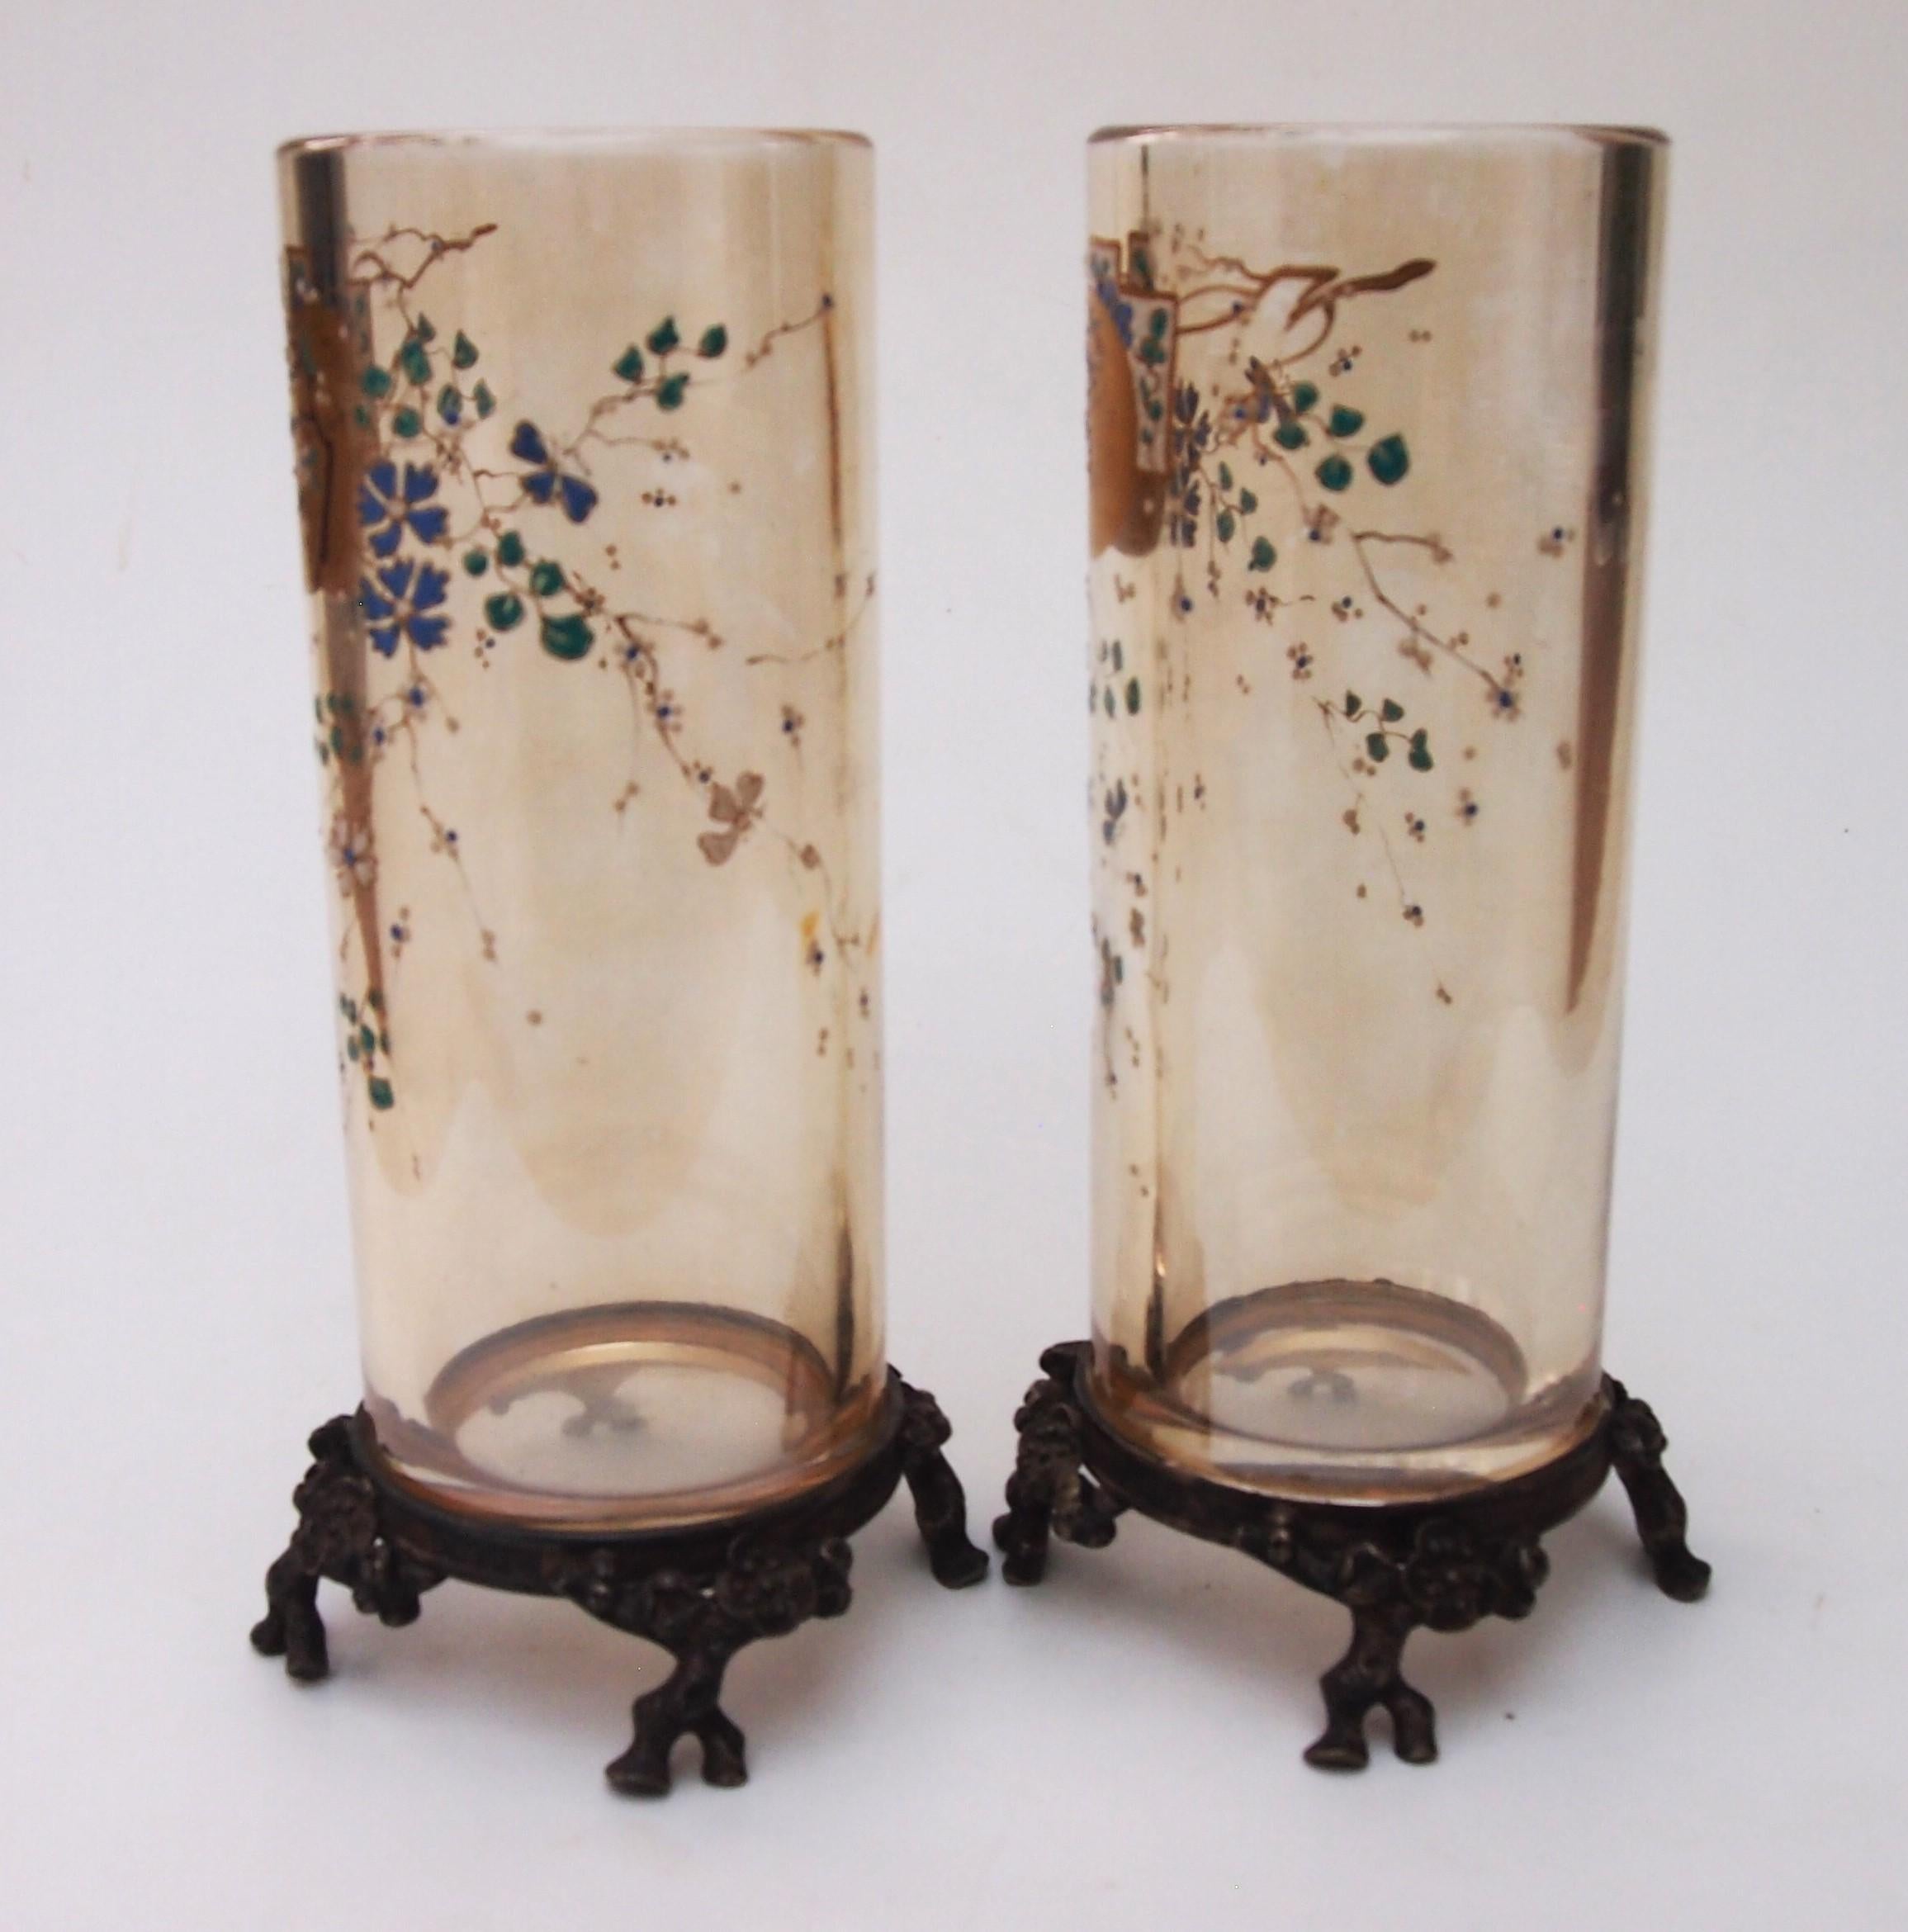 An very important and rare pair of Baccarat Chinoiserie vases on original Baccarat gilt bronze stands -in fabulous condition for their age. The vases are in the Baccarat classic pale orange/yellow lead crystal and enamelled in polychrome and gilded